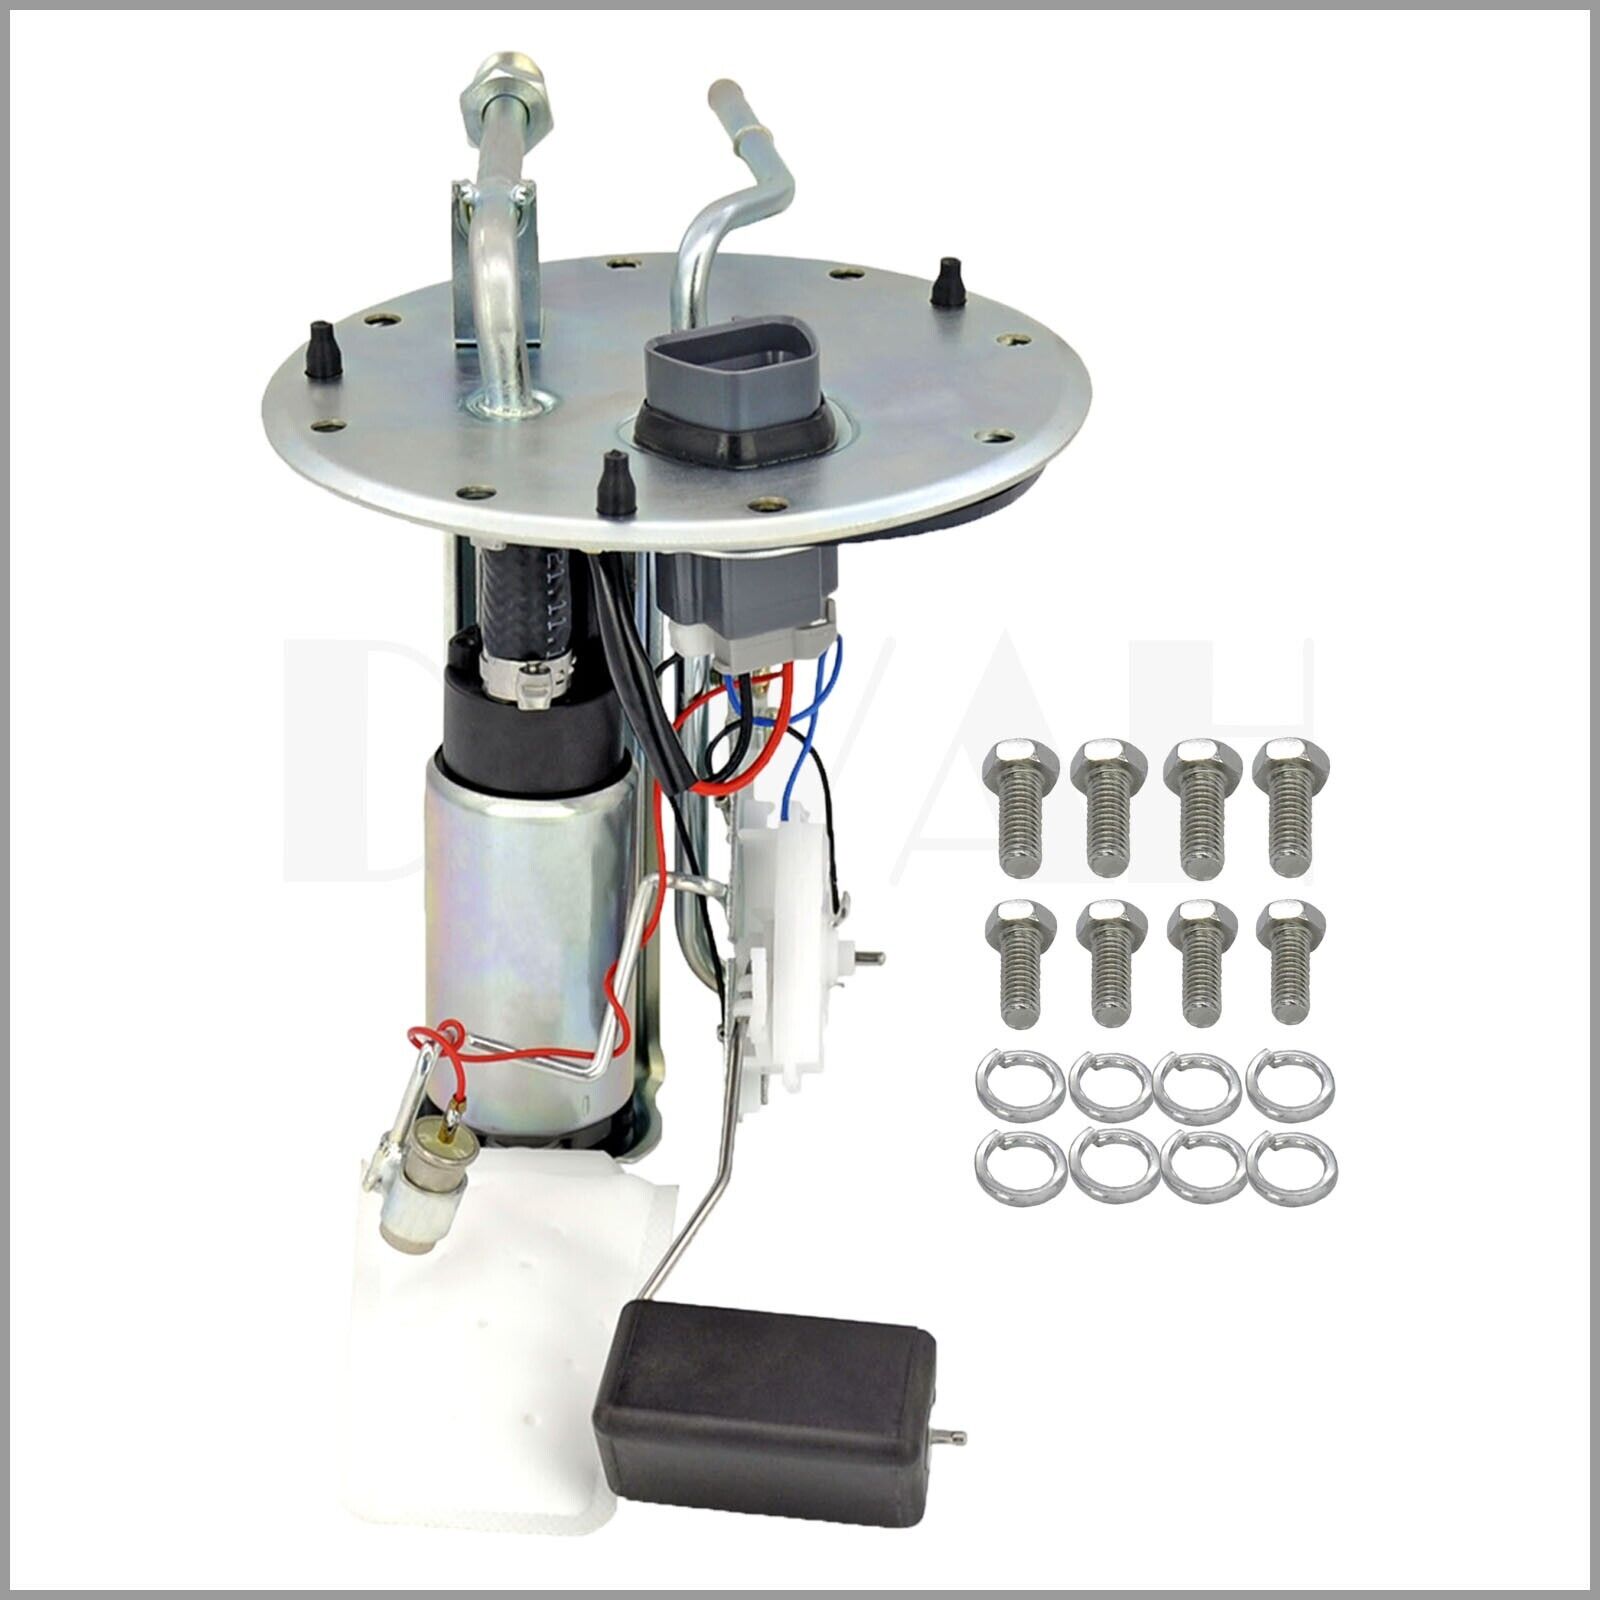 Fuel Pump Module Assembly Fits for 1993-1997 Geo Prizm Toyota Corolla 1.8L 1.6L